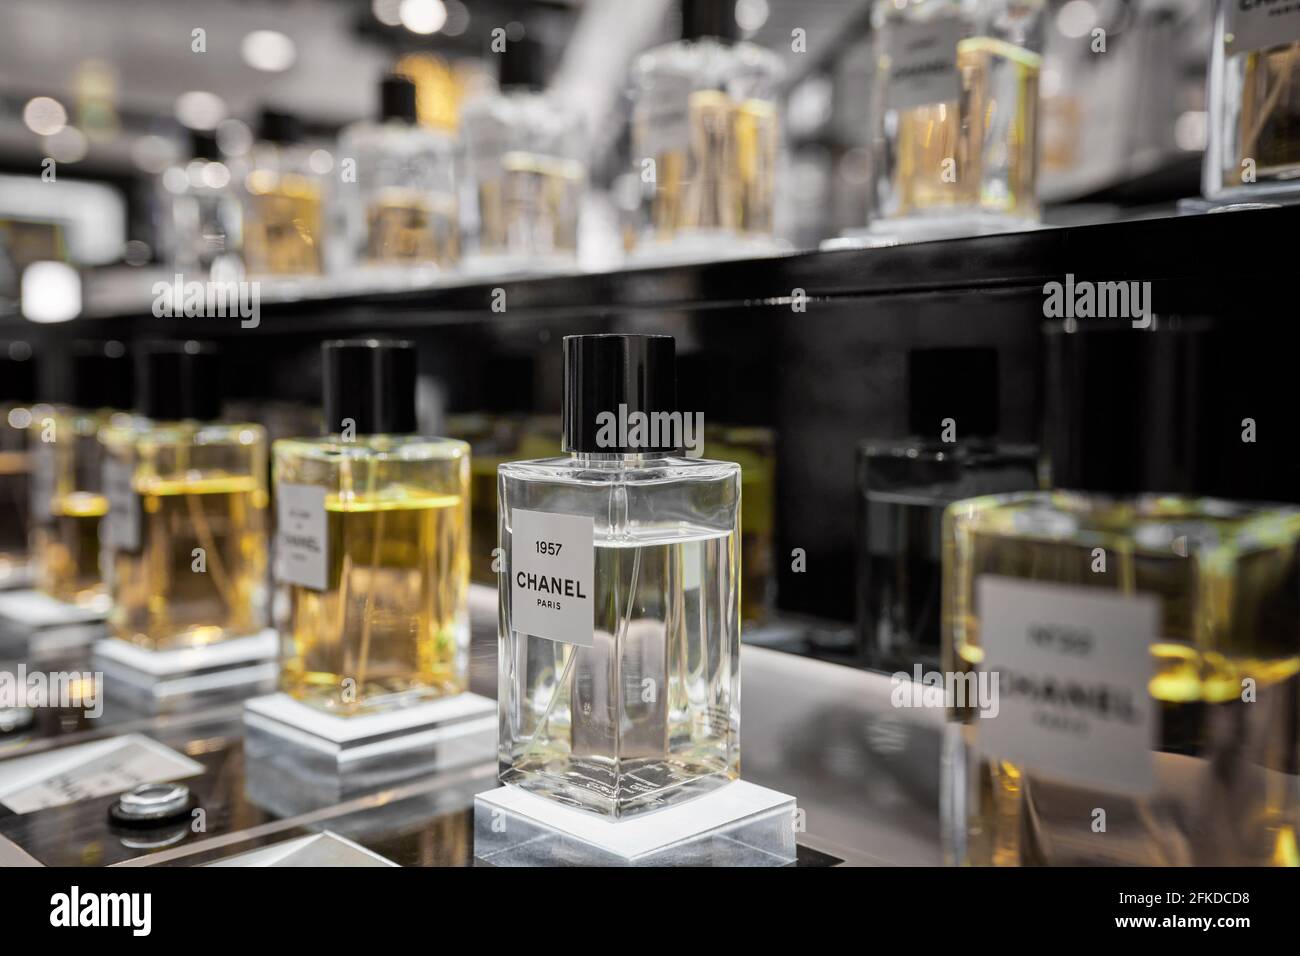 Female perfume Chanel No. 22 bottle closeup in store showcase. Perspective view of french Chanel perfume collection. Milan, Italy - December 15, 2020. Stock Photo